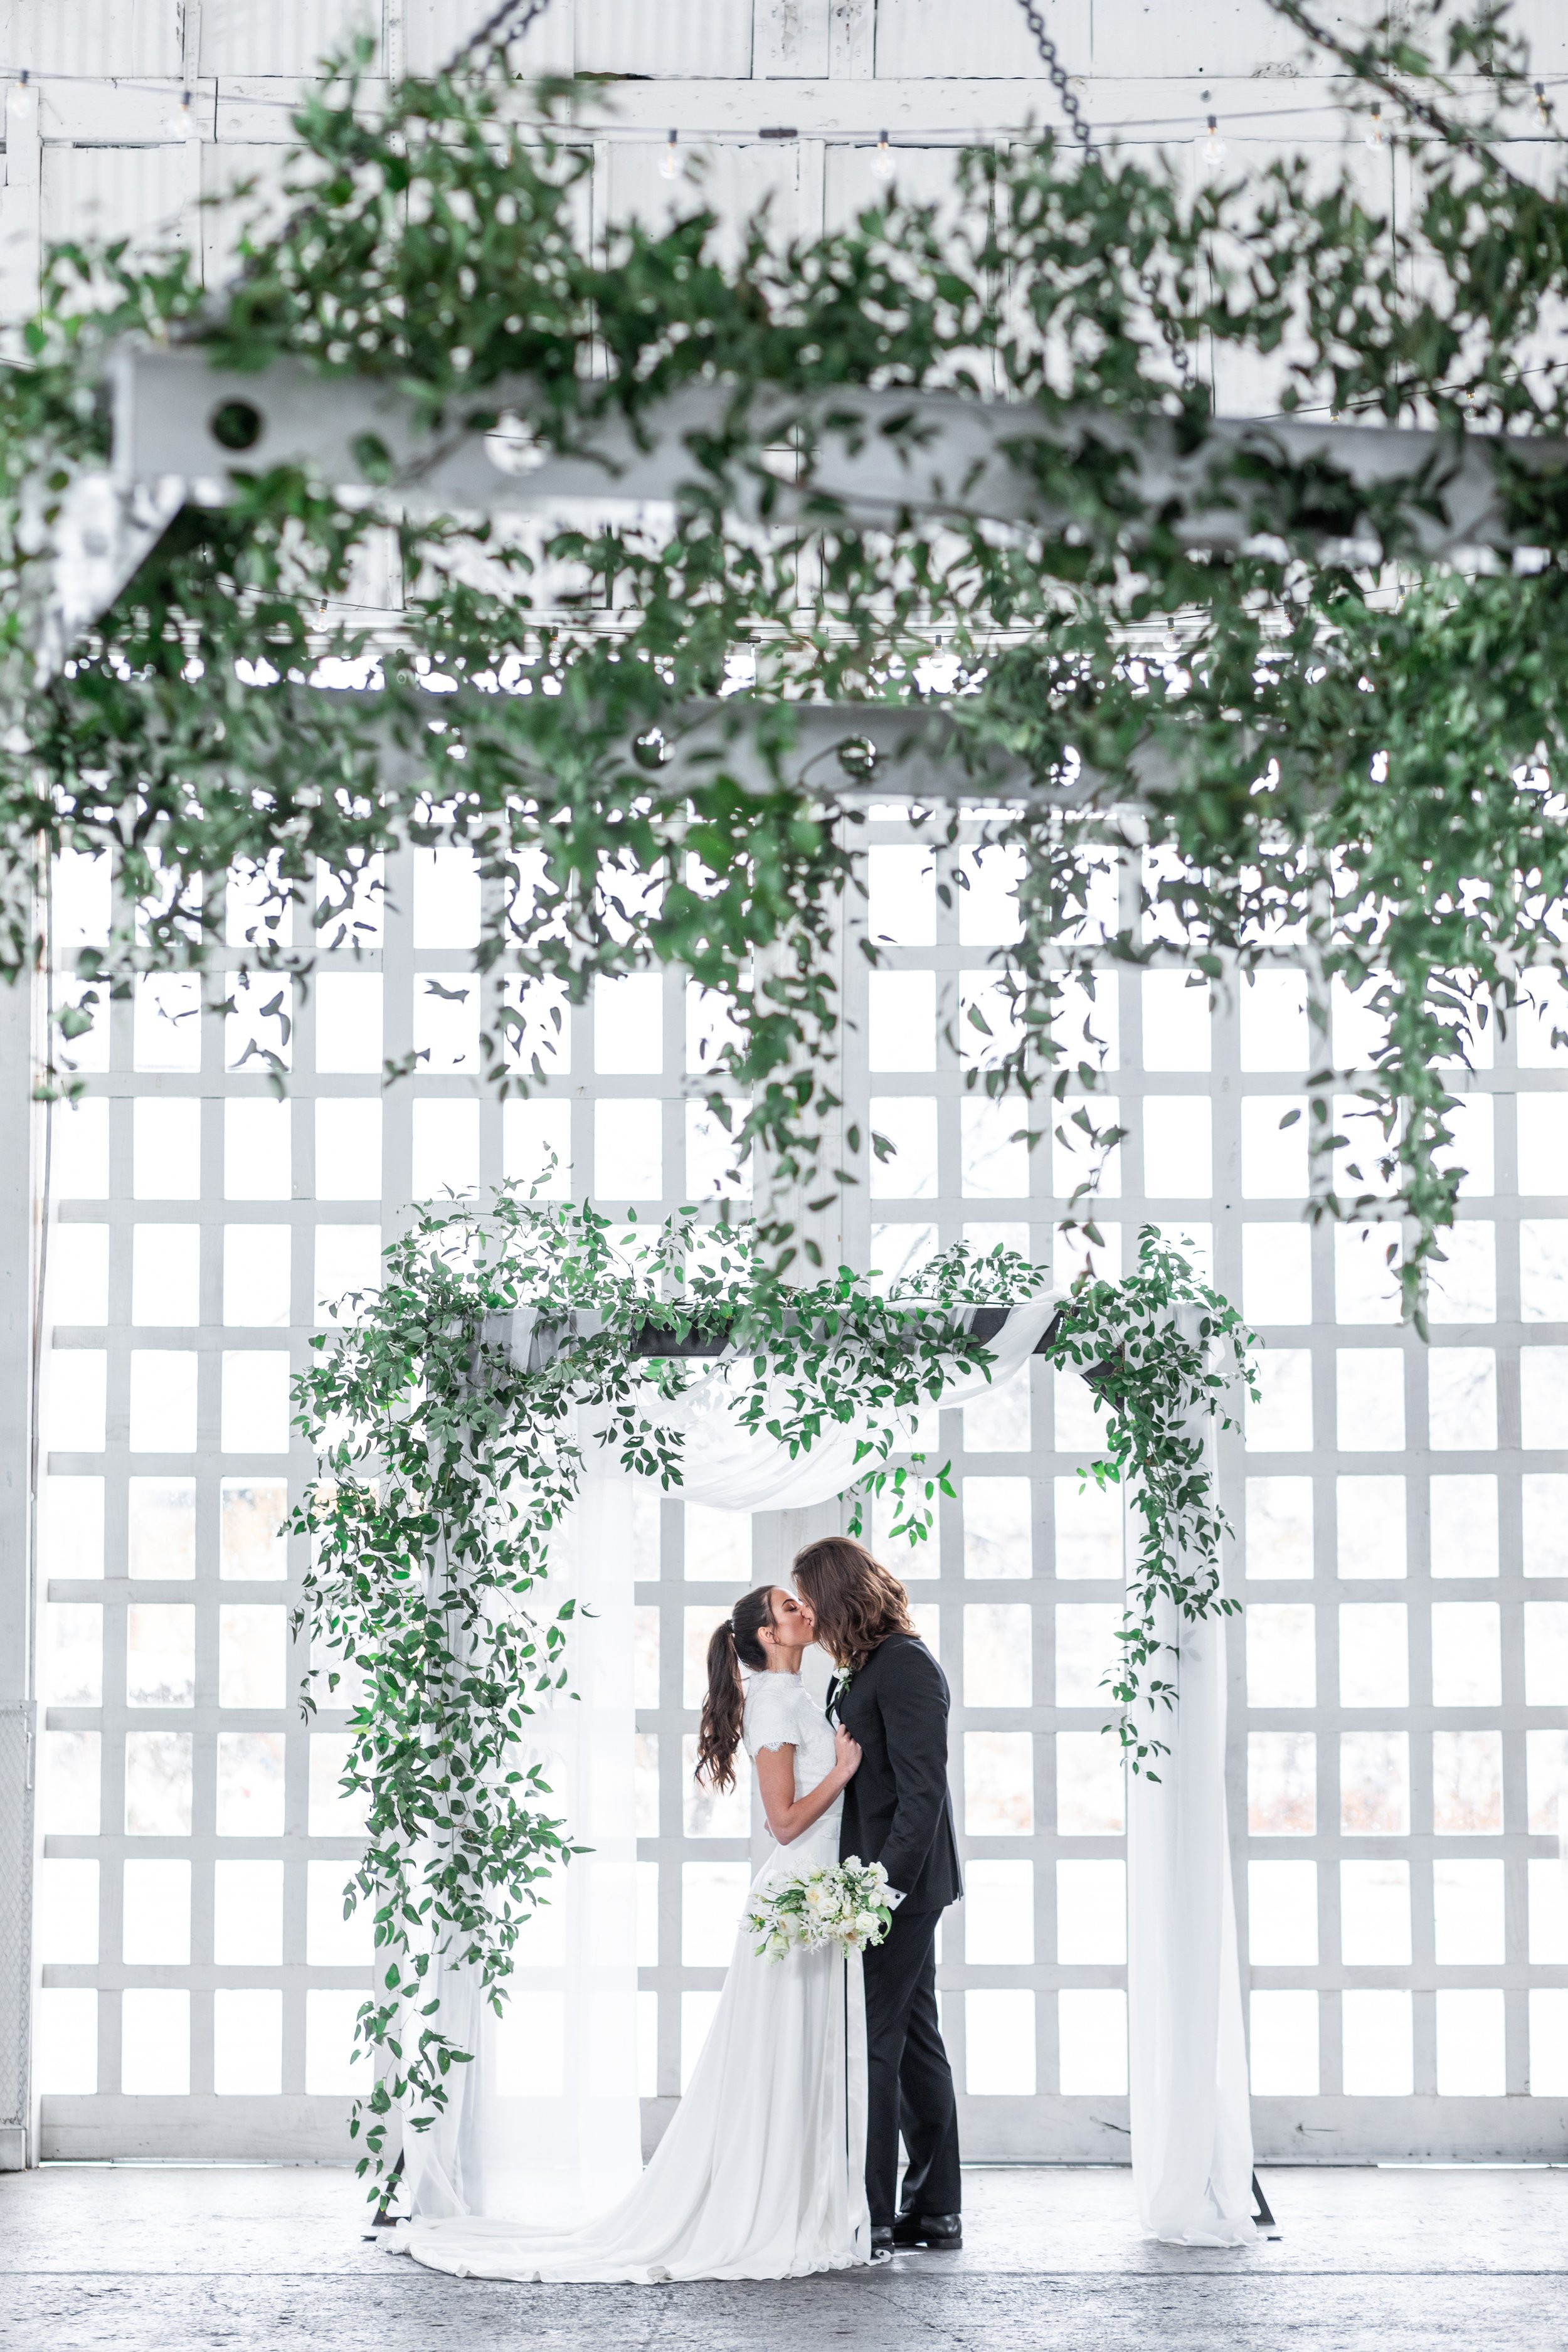  A groom and bride kiss in front of a wall of windows and fresh greenery by Savanna Richardson Photography. stunning altar ideas wall of windows #savannarichardsonphotography #utahvendor #utahweddingphotographer #MilleFleurDesign #Utahweddingdesigns 